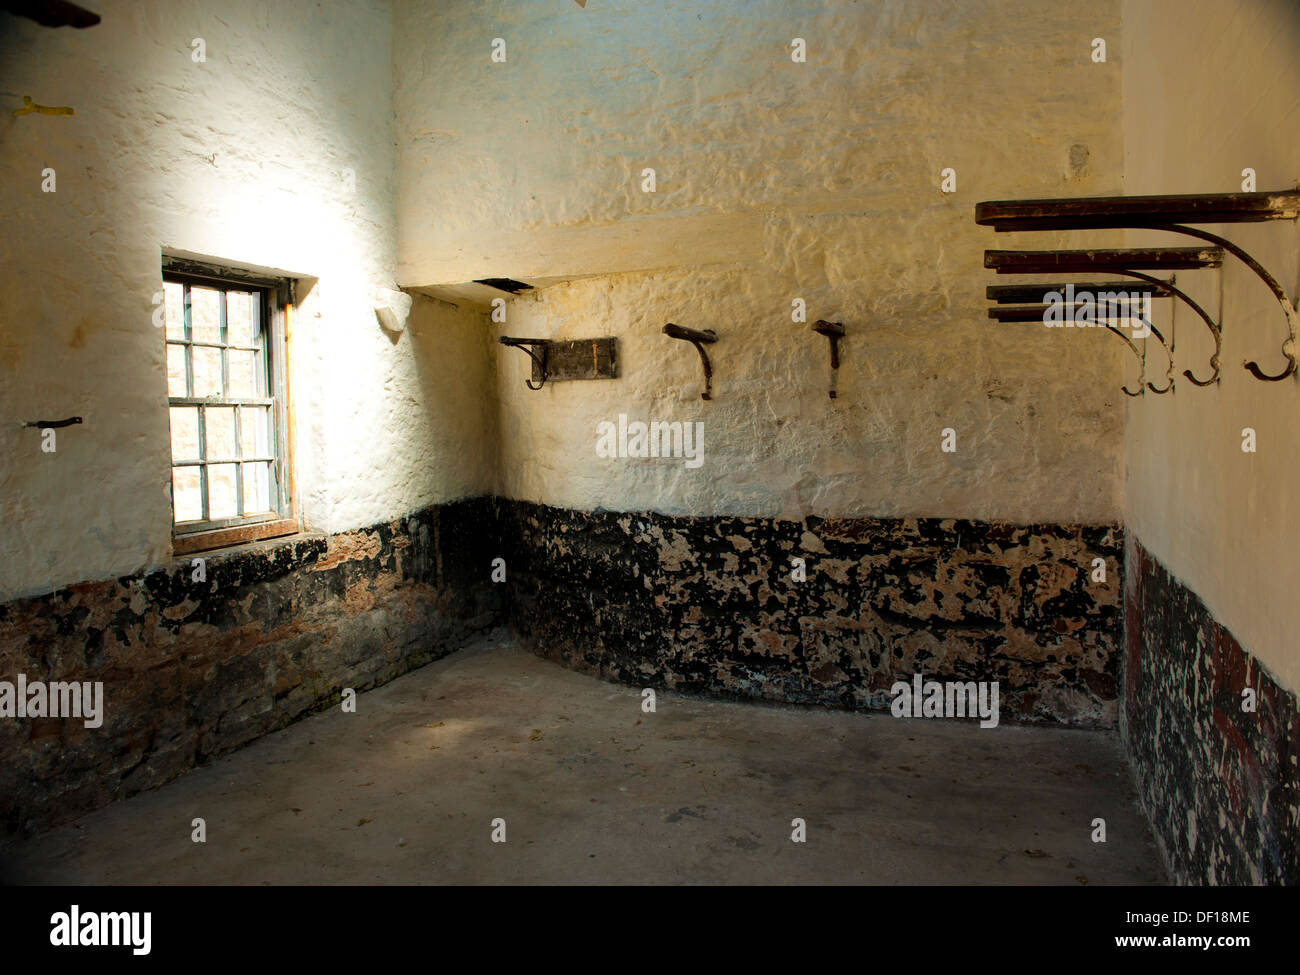 Old stables inside historic building with window light and brackets on walls Stock Photo